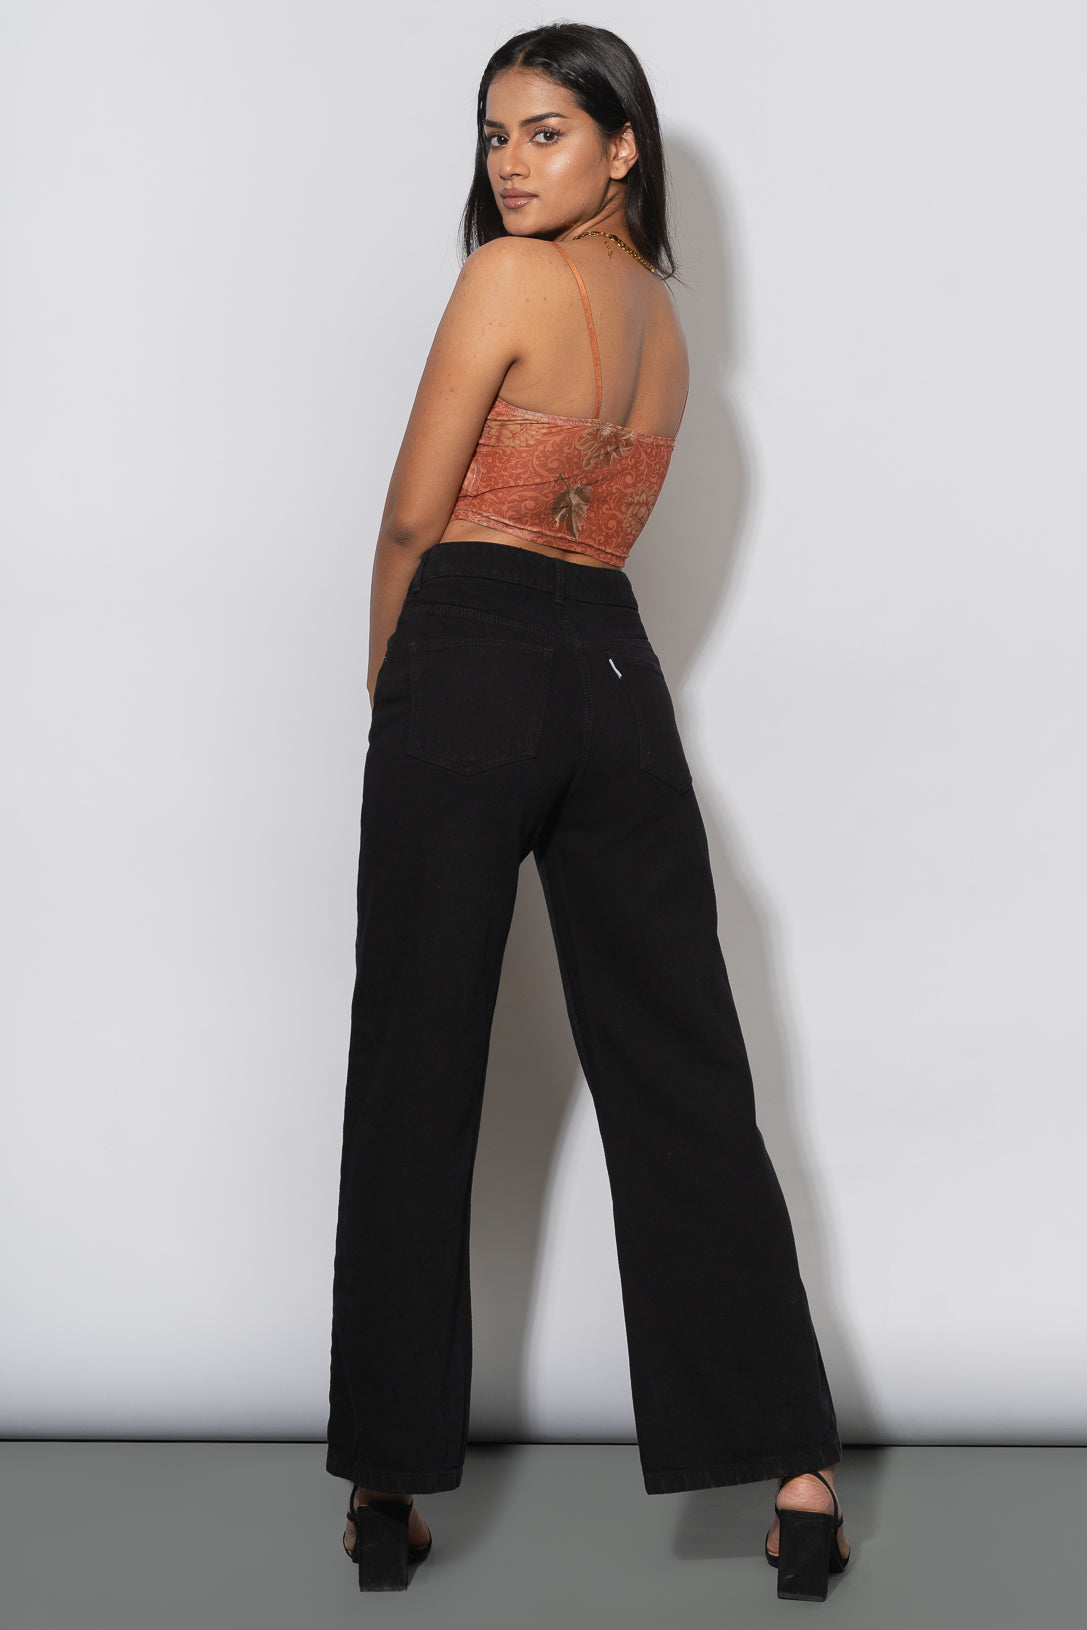 Jet Black Balloon Cargo Pant For Women - Shop the Latest Trend! -  Nolabels.in